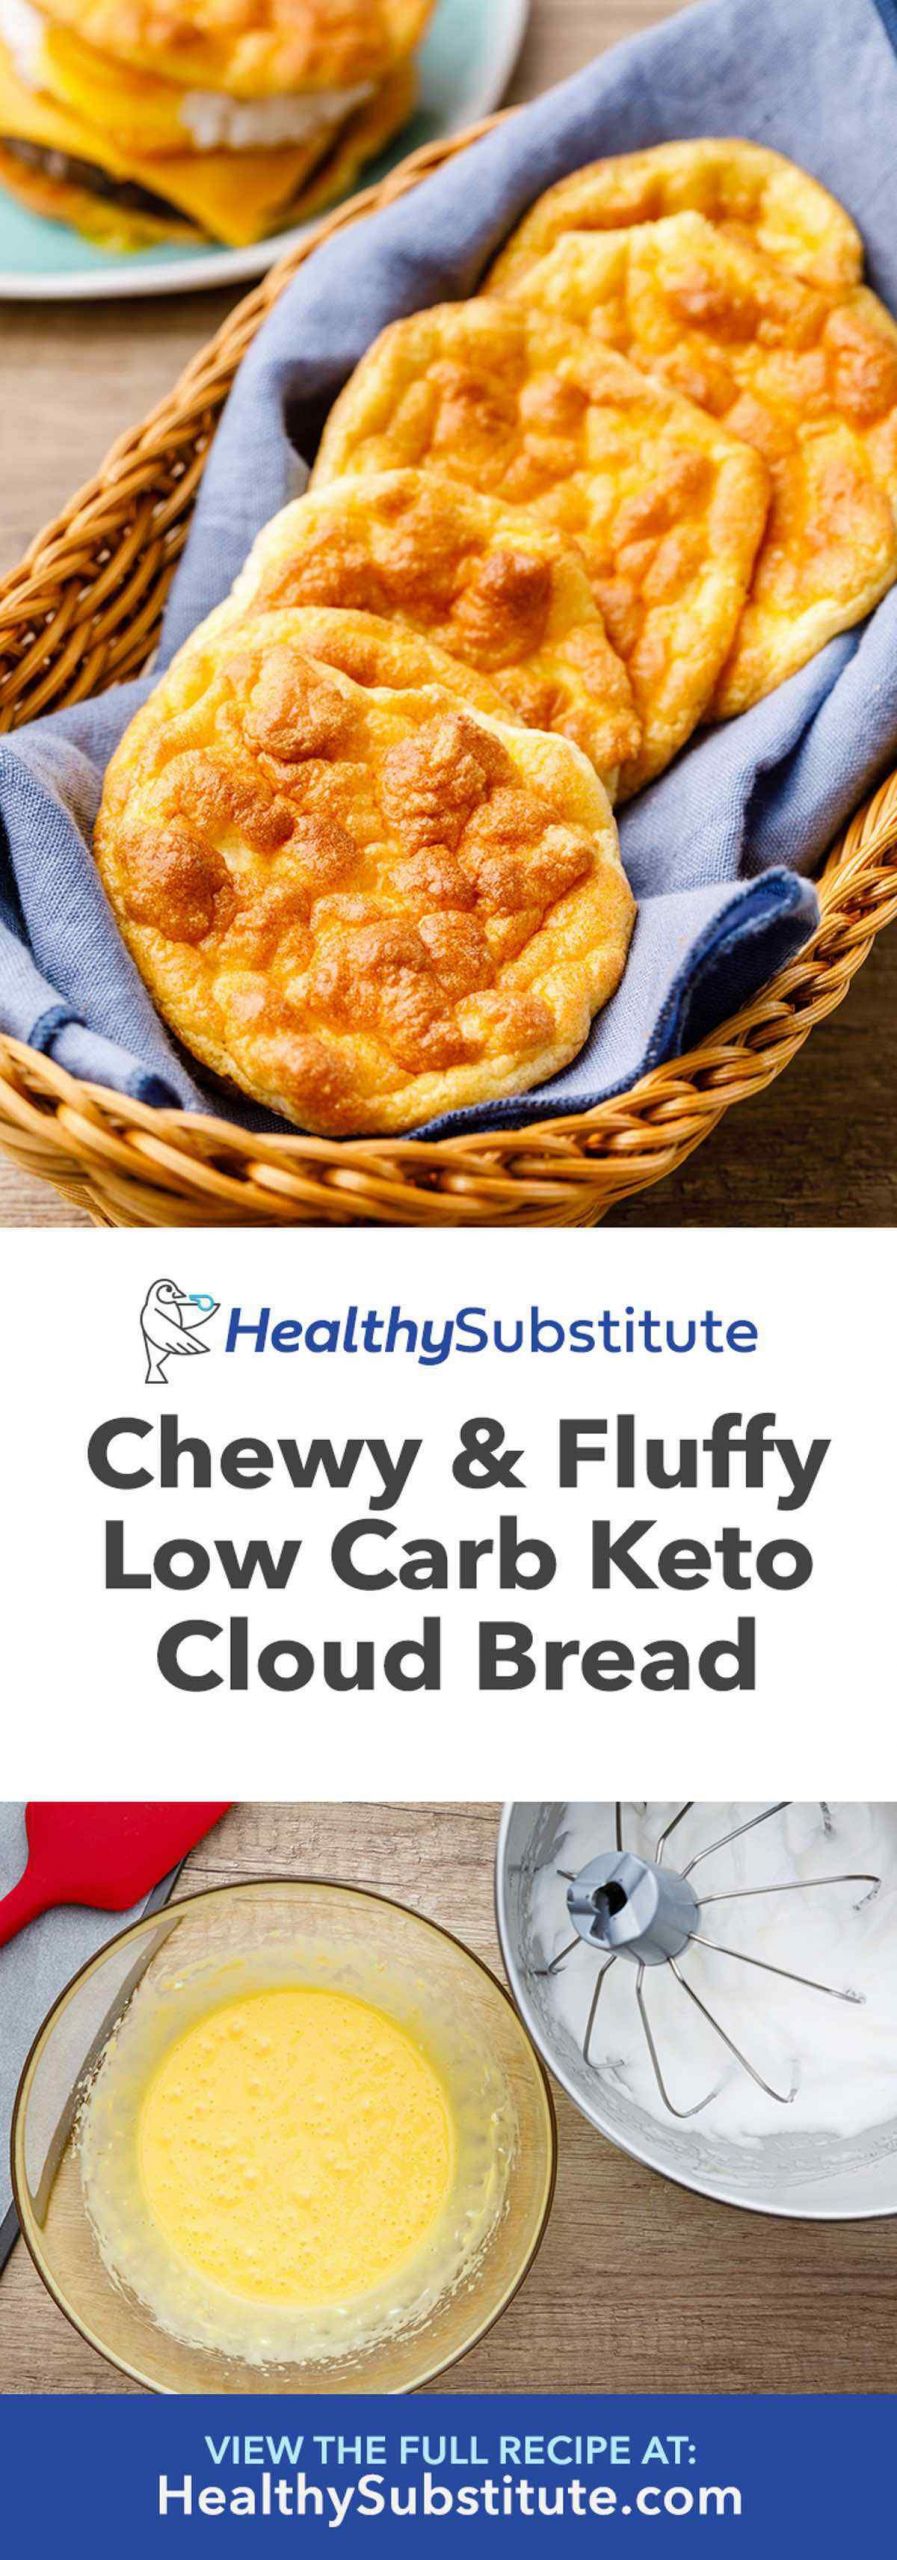 Keto Cloud Bread Recipe Almond Flour
 Chewy and Fluffy Keto Cloud Bread Love this Healthy